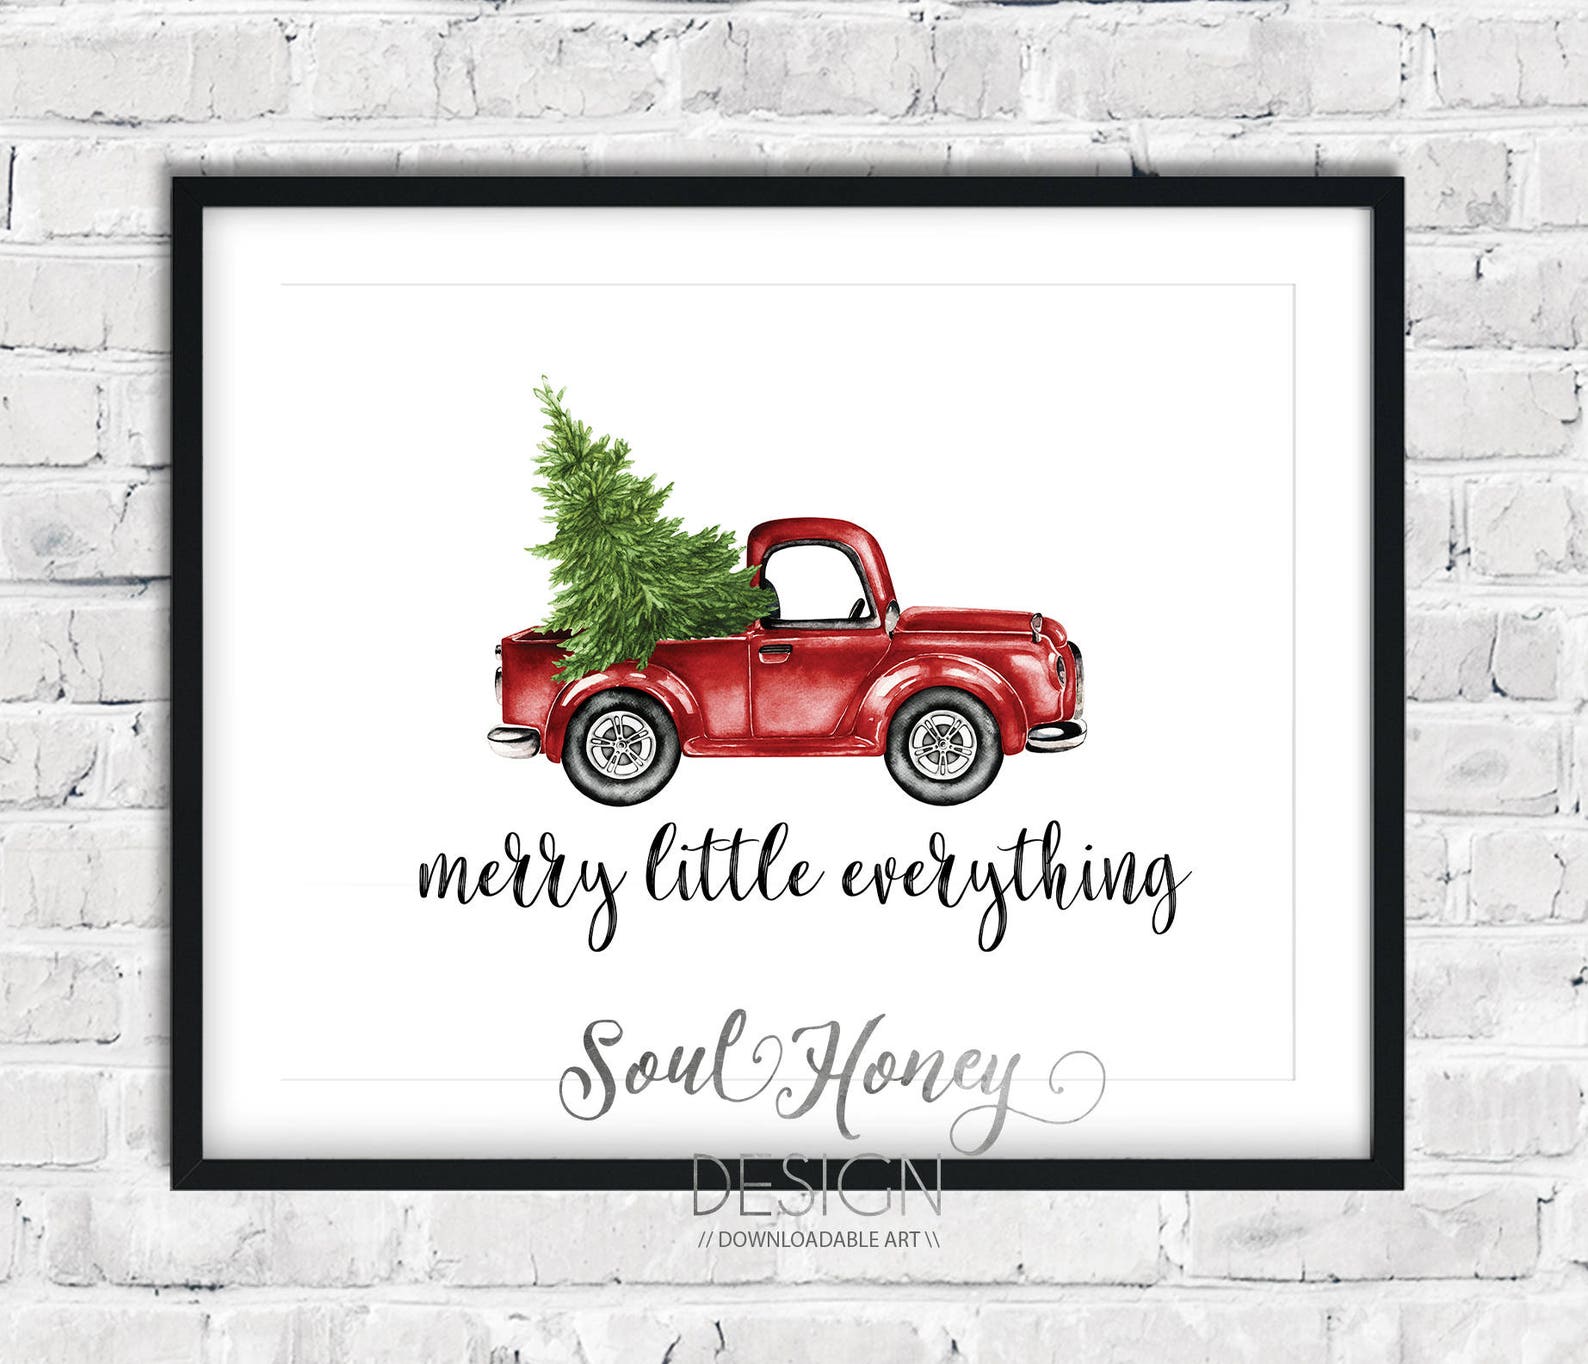 Downloadable Prints Merry Little Everything Watercolor Truck - Etsy